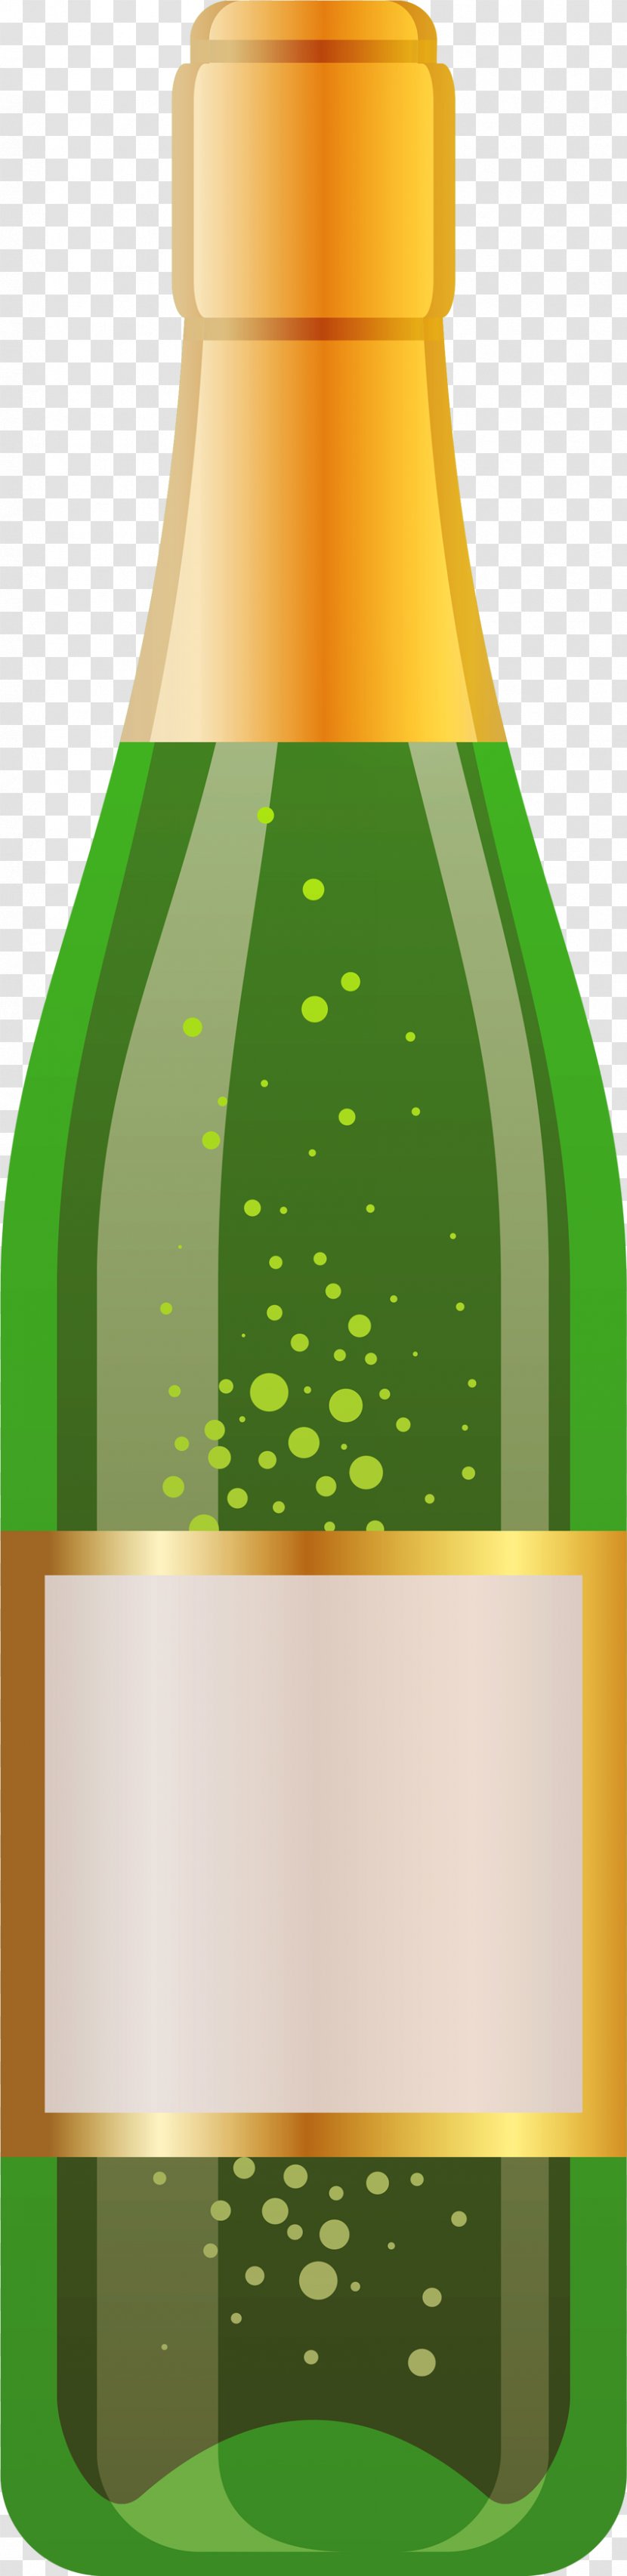 Red Wine White Champagne Beer - Bottle - Image Transparent PNG